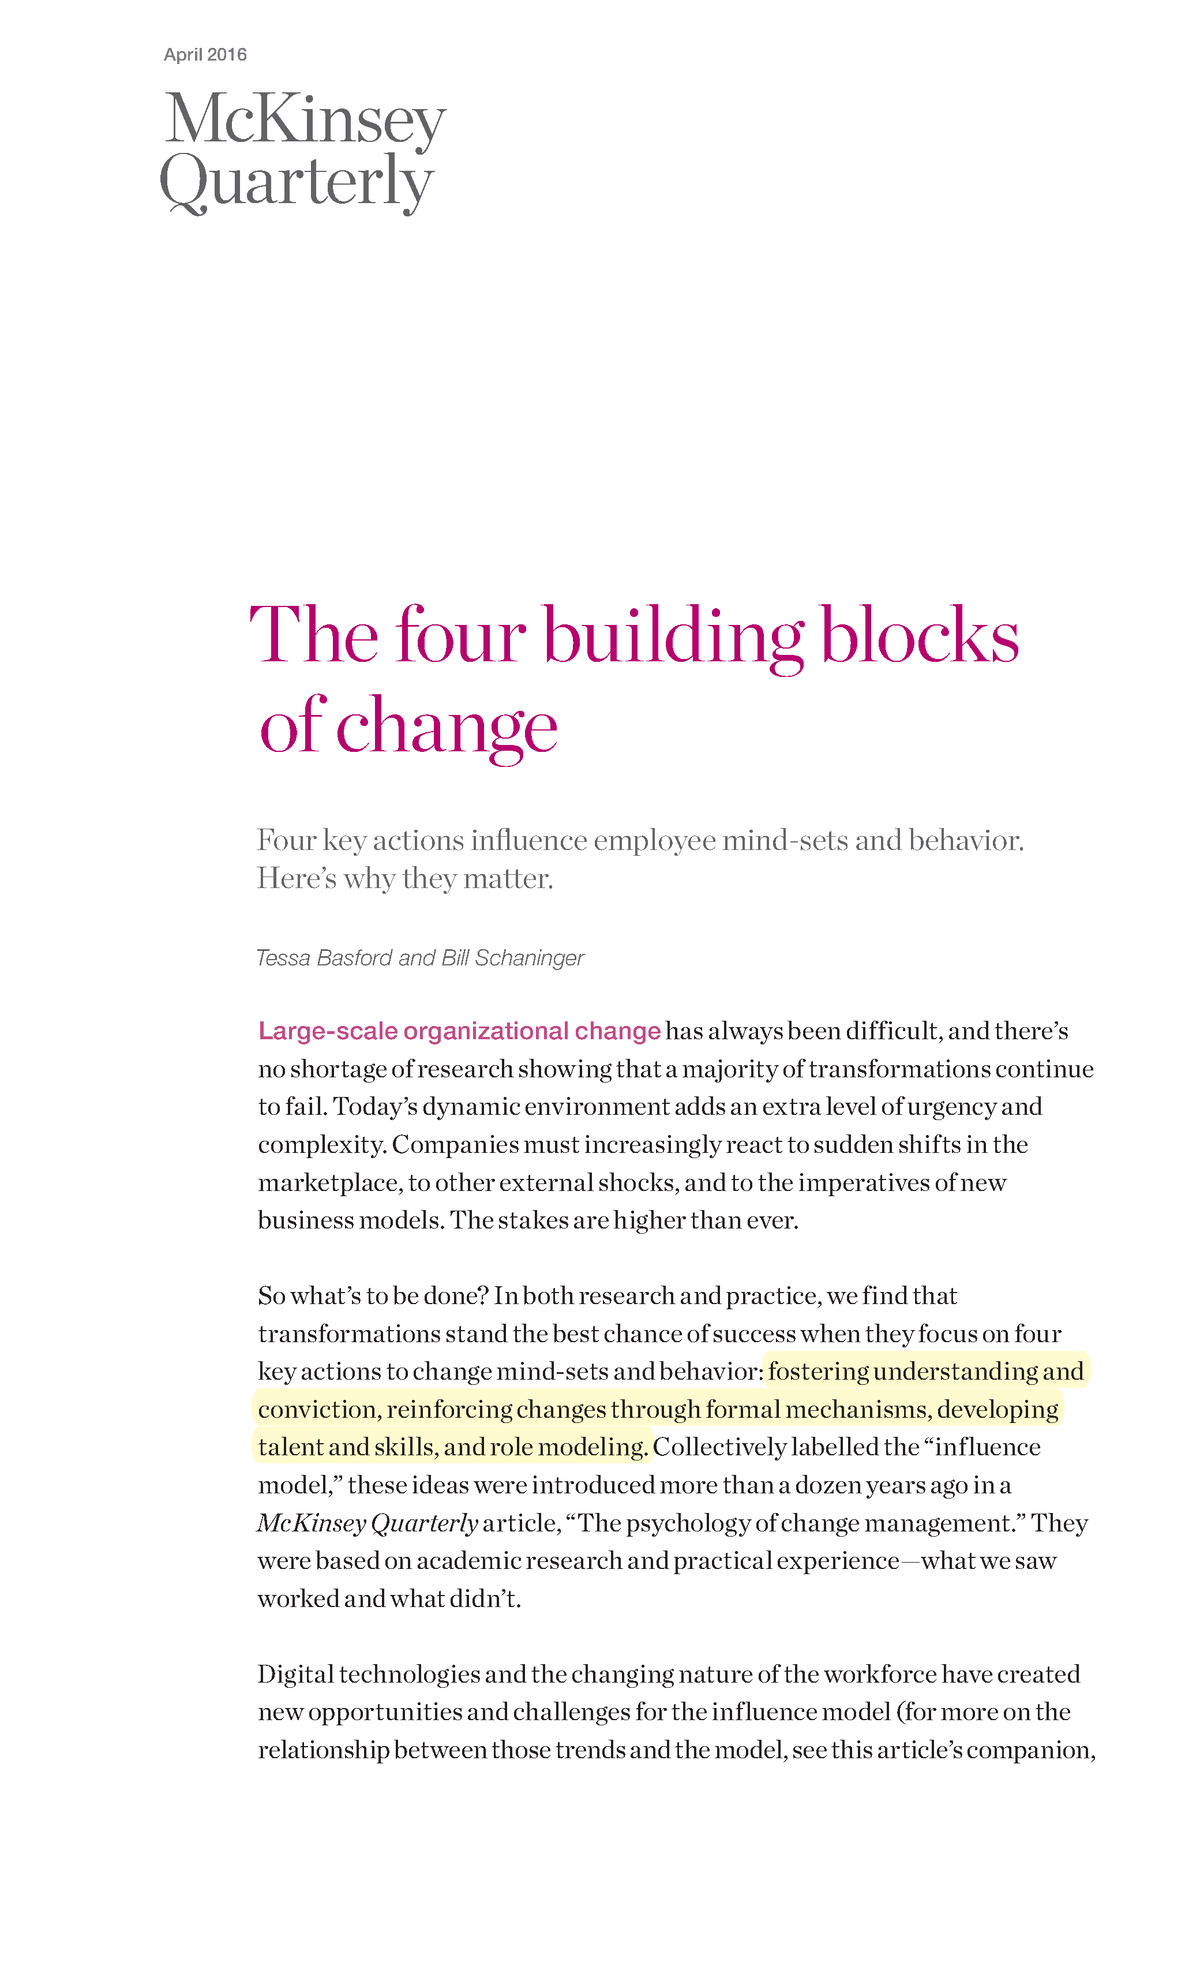 The four building blocks of change according to a McK study, based